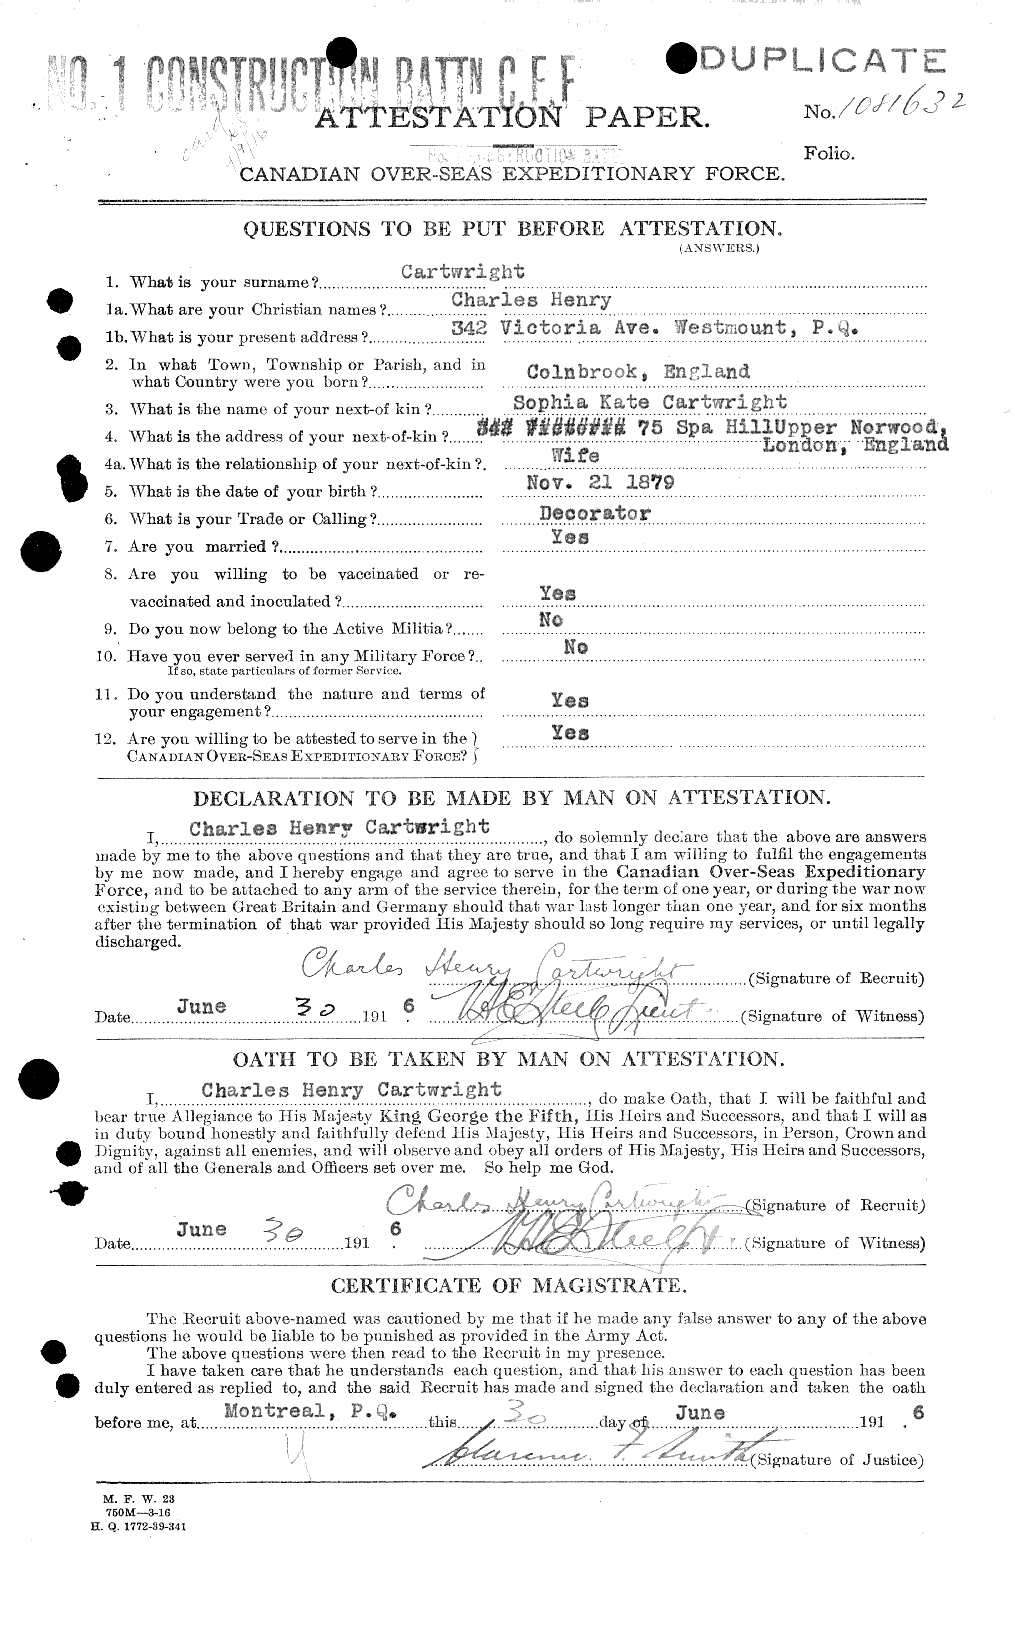 Personnel Records of the First World War - CEF 011560a